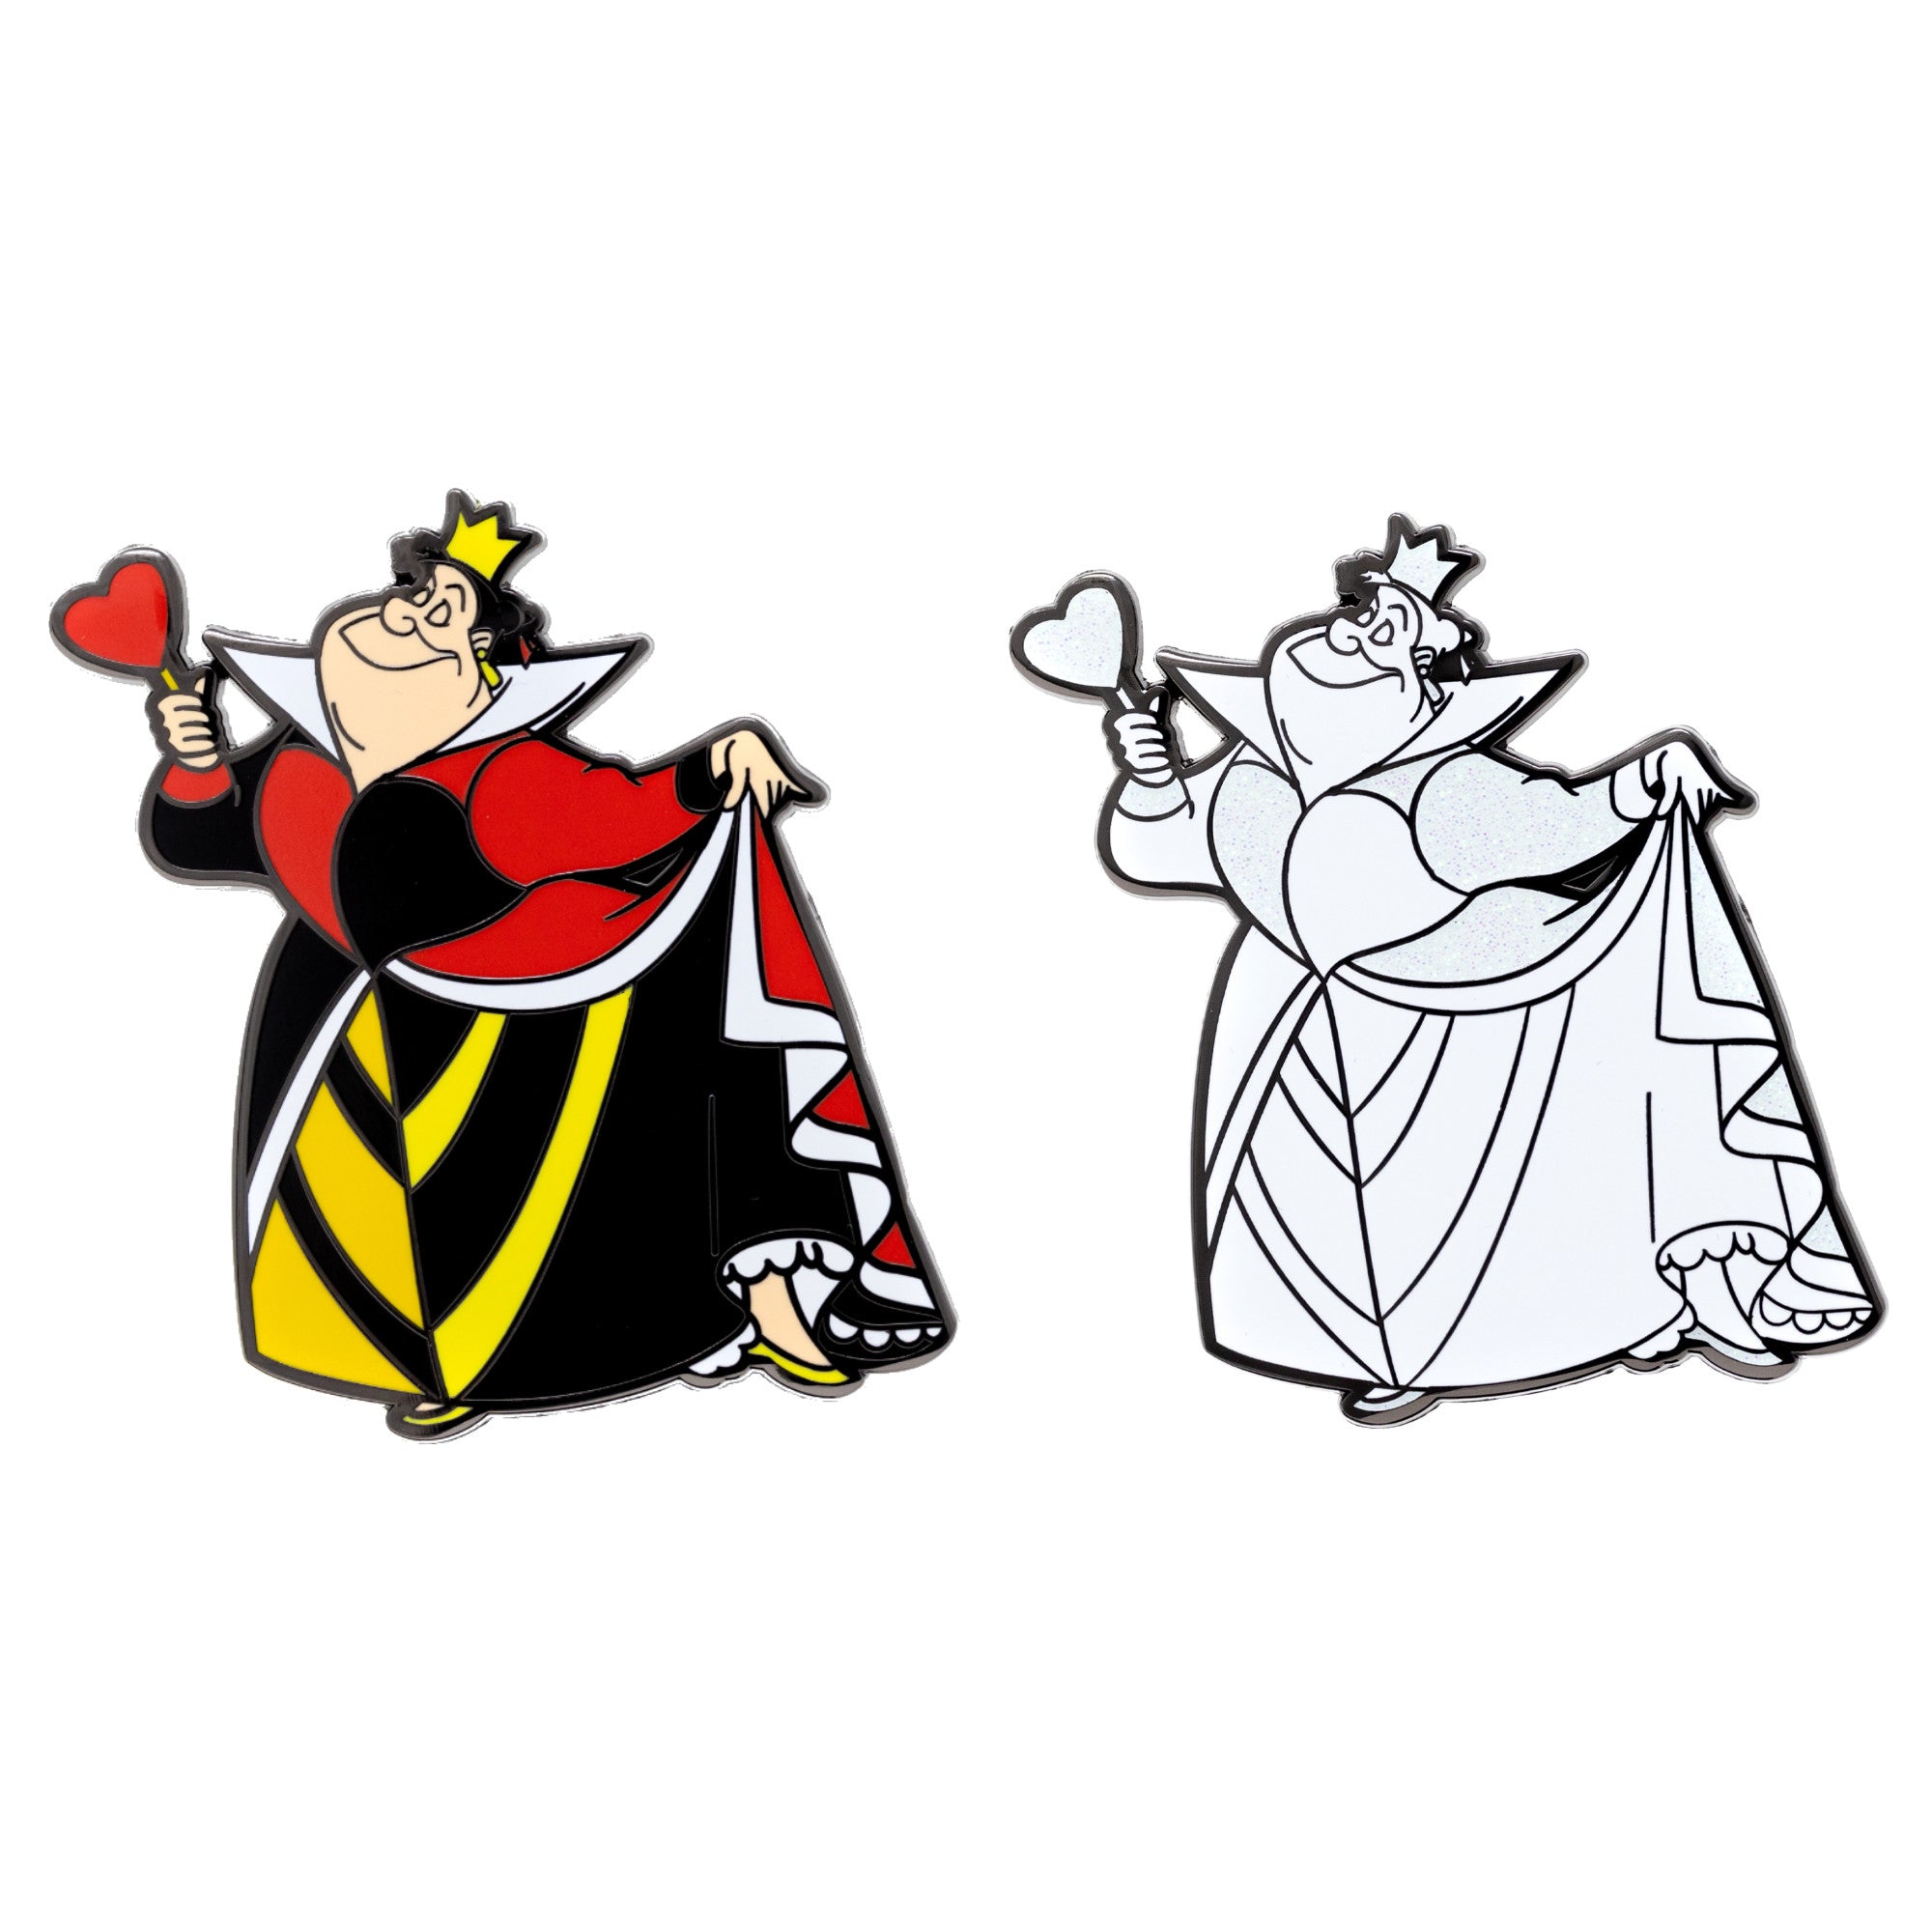 Disney Villains Queen of Hearts Large Collectible Pins - LE 400 & LE 100 2 Pack